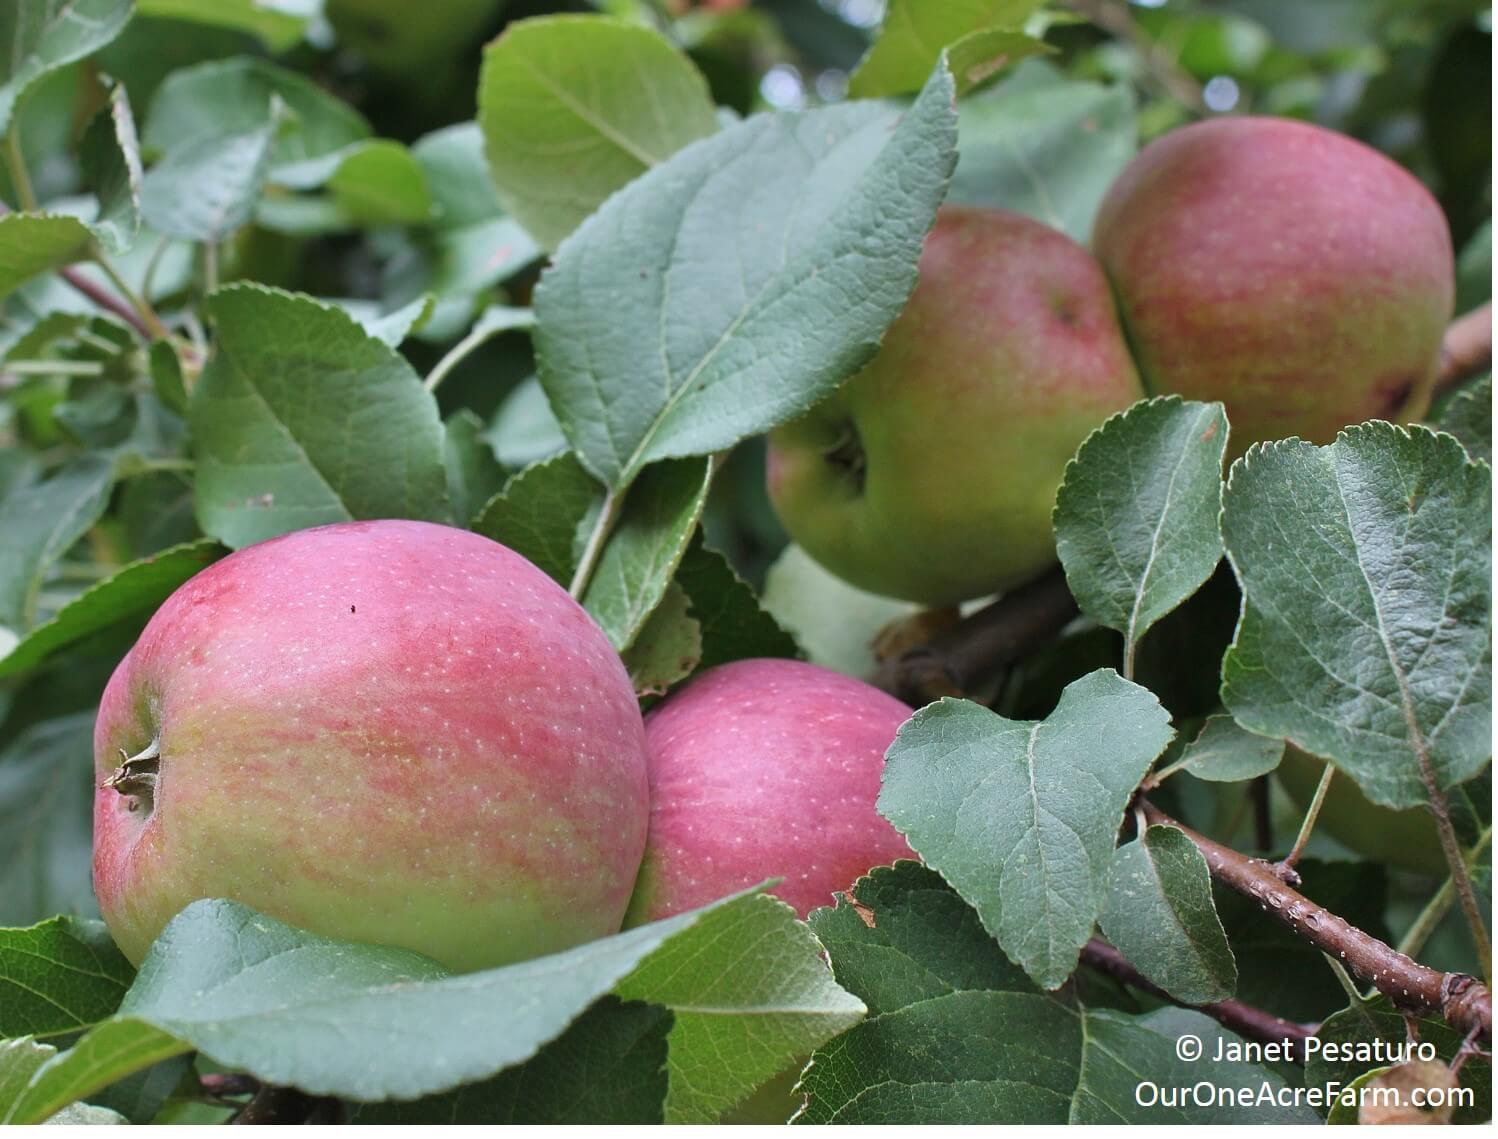 How to Grow Apples Without Pesticides